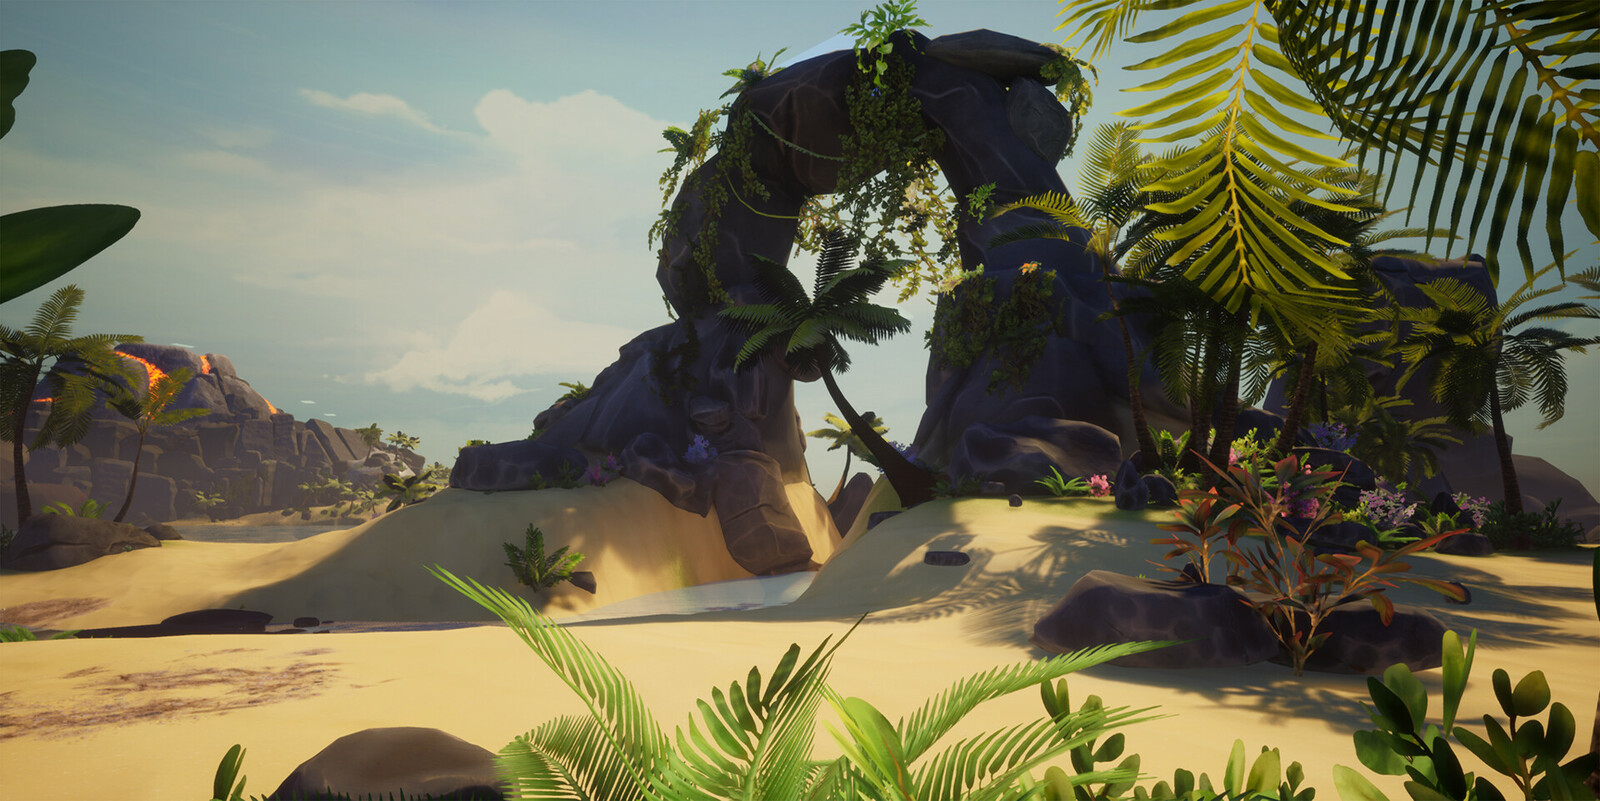 The Beach level was our 2nd environment for the project. I assisted in the set dressing of the two main islands and the volcano island, as well as continued to create props to fit this environment.